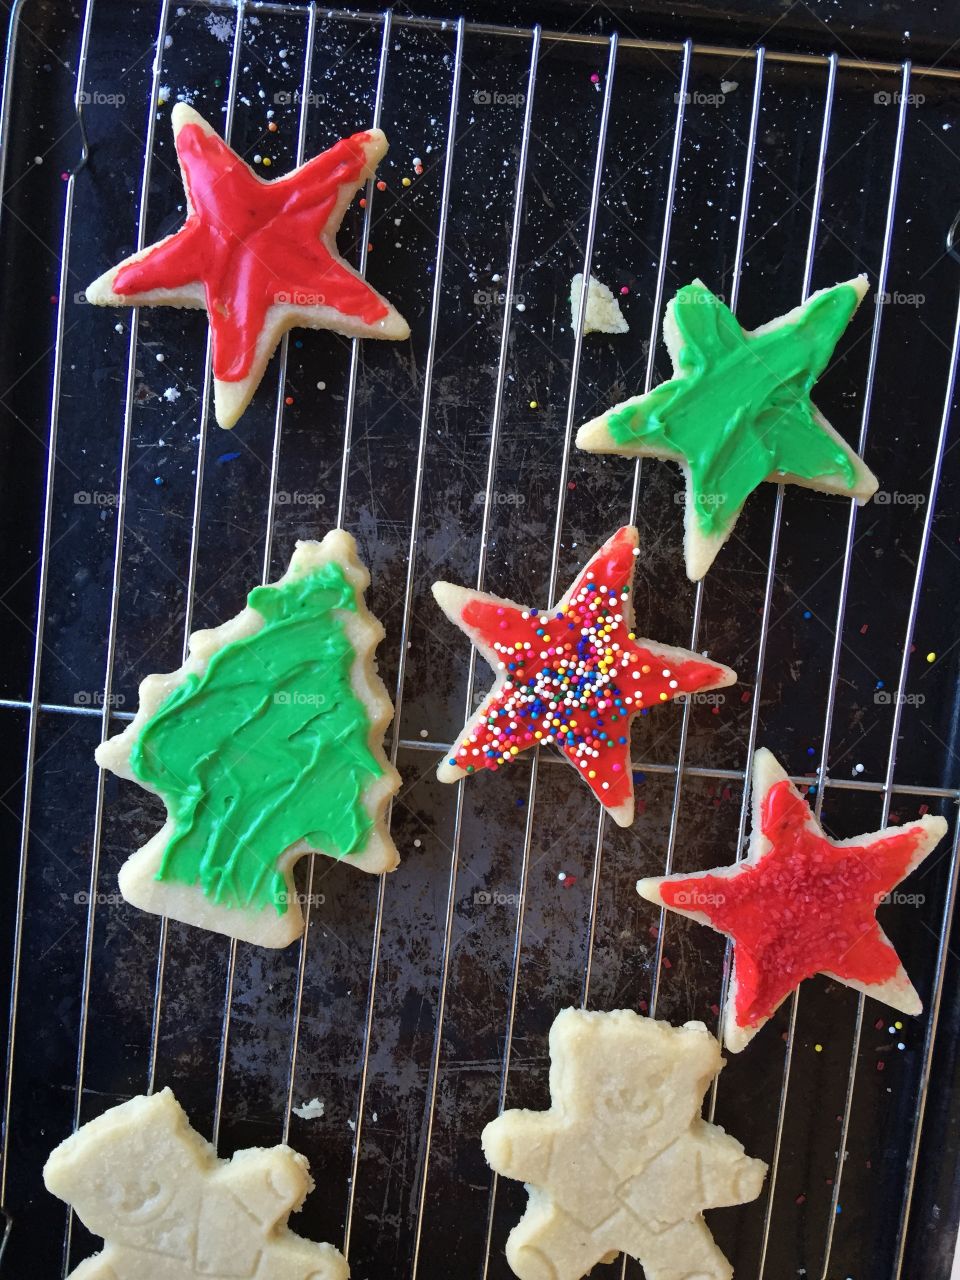 Christmas cookies, some with icing